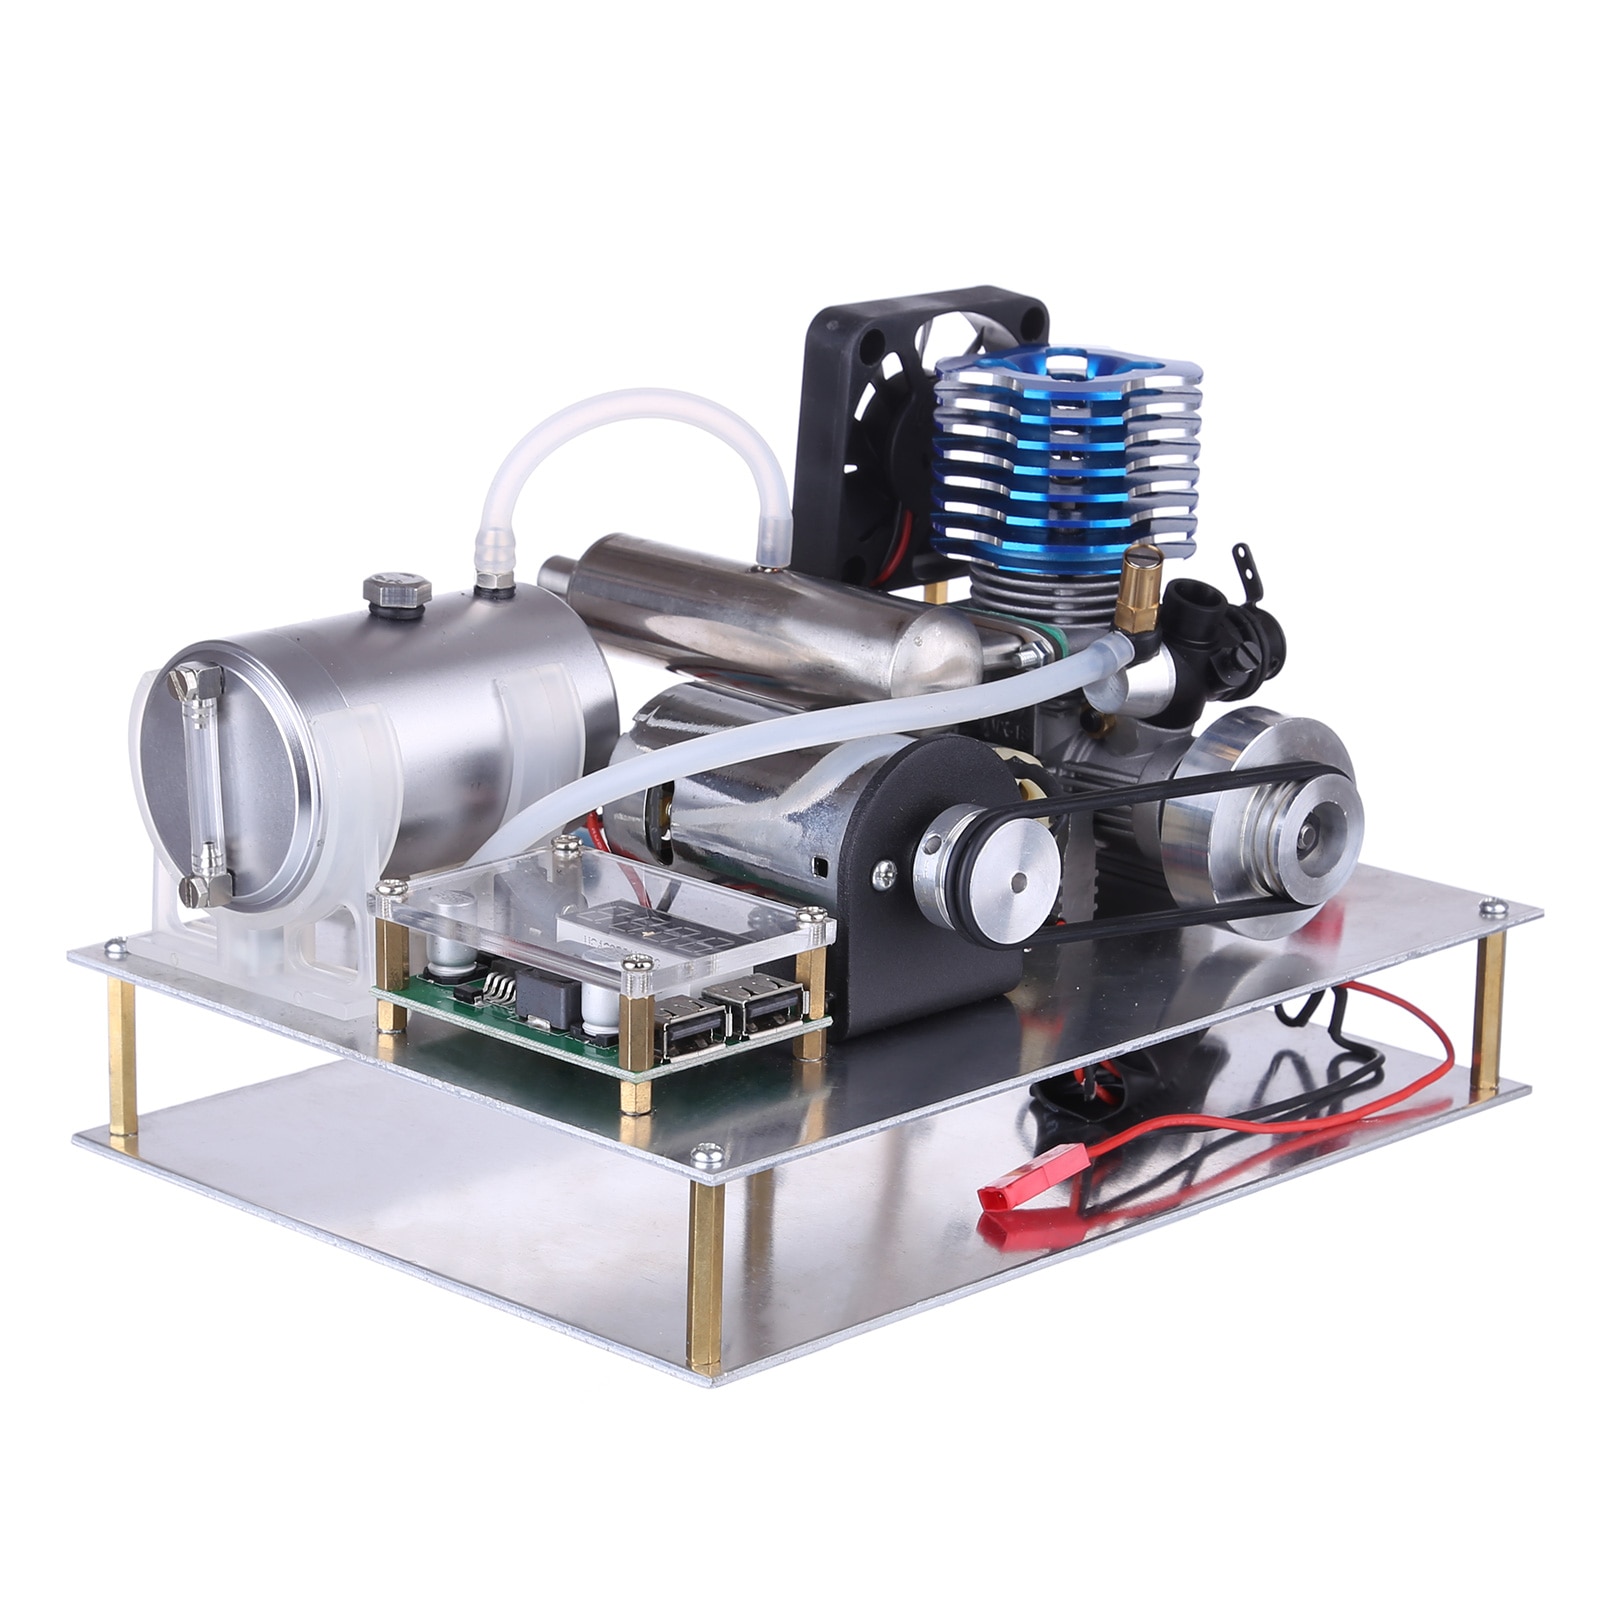 VX 18 Single Cylinder 2-stroke Air-cooled Assembled Methanol Engine Generator Model with Voltage Digital Display and Dual USB 1